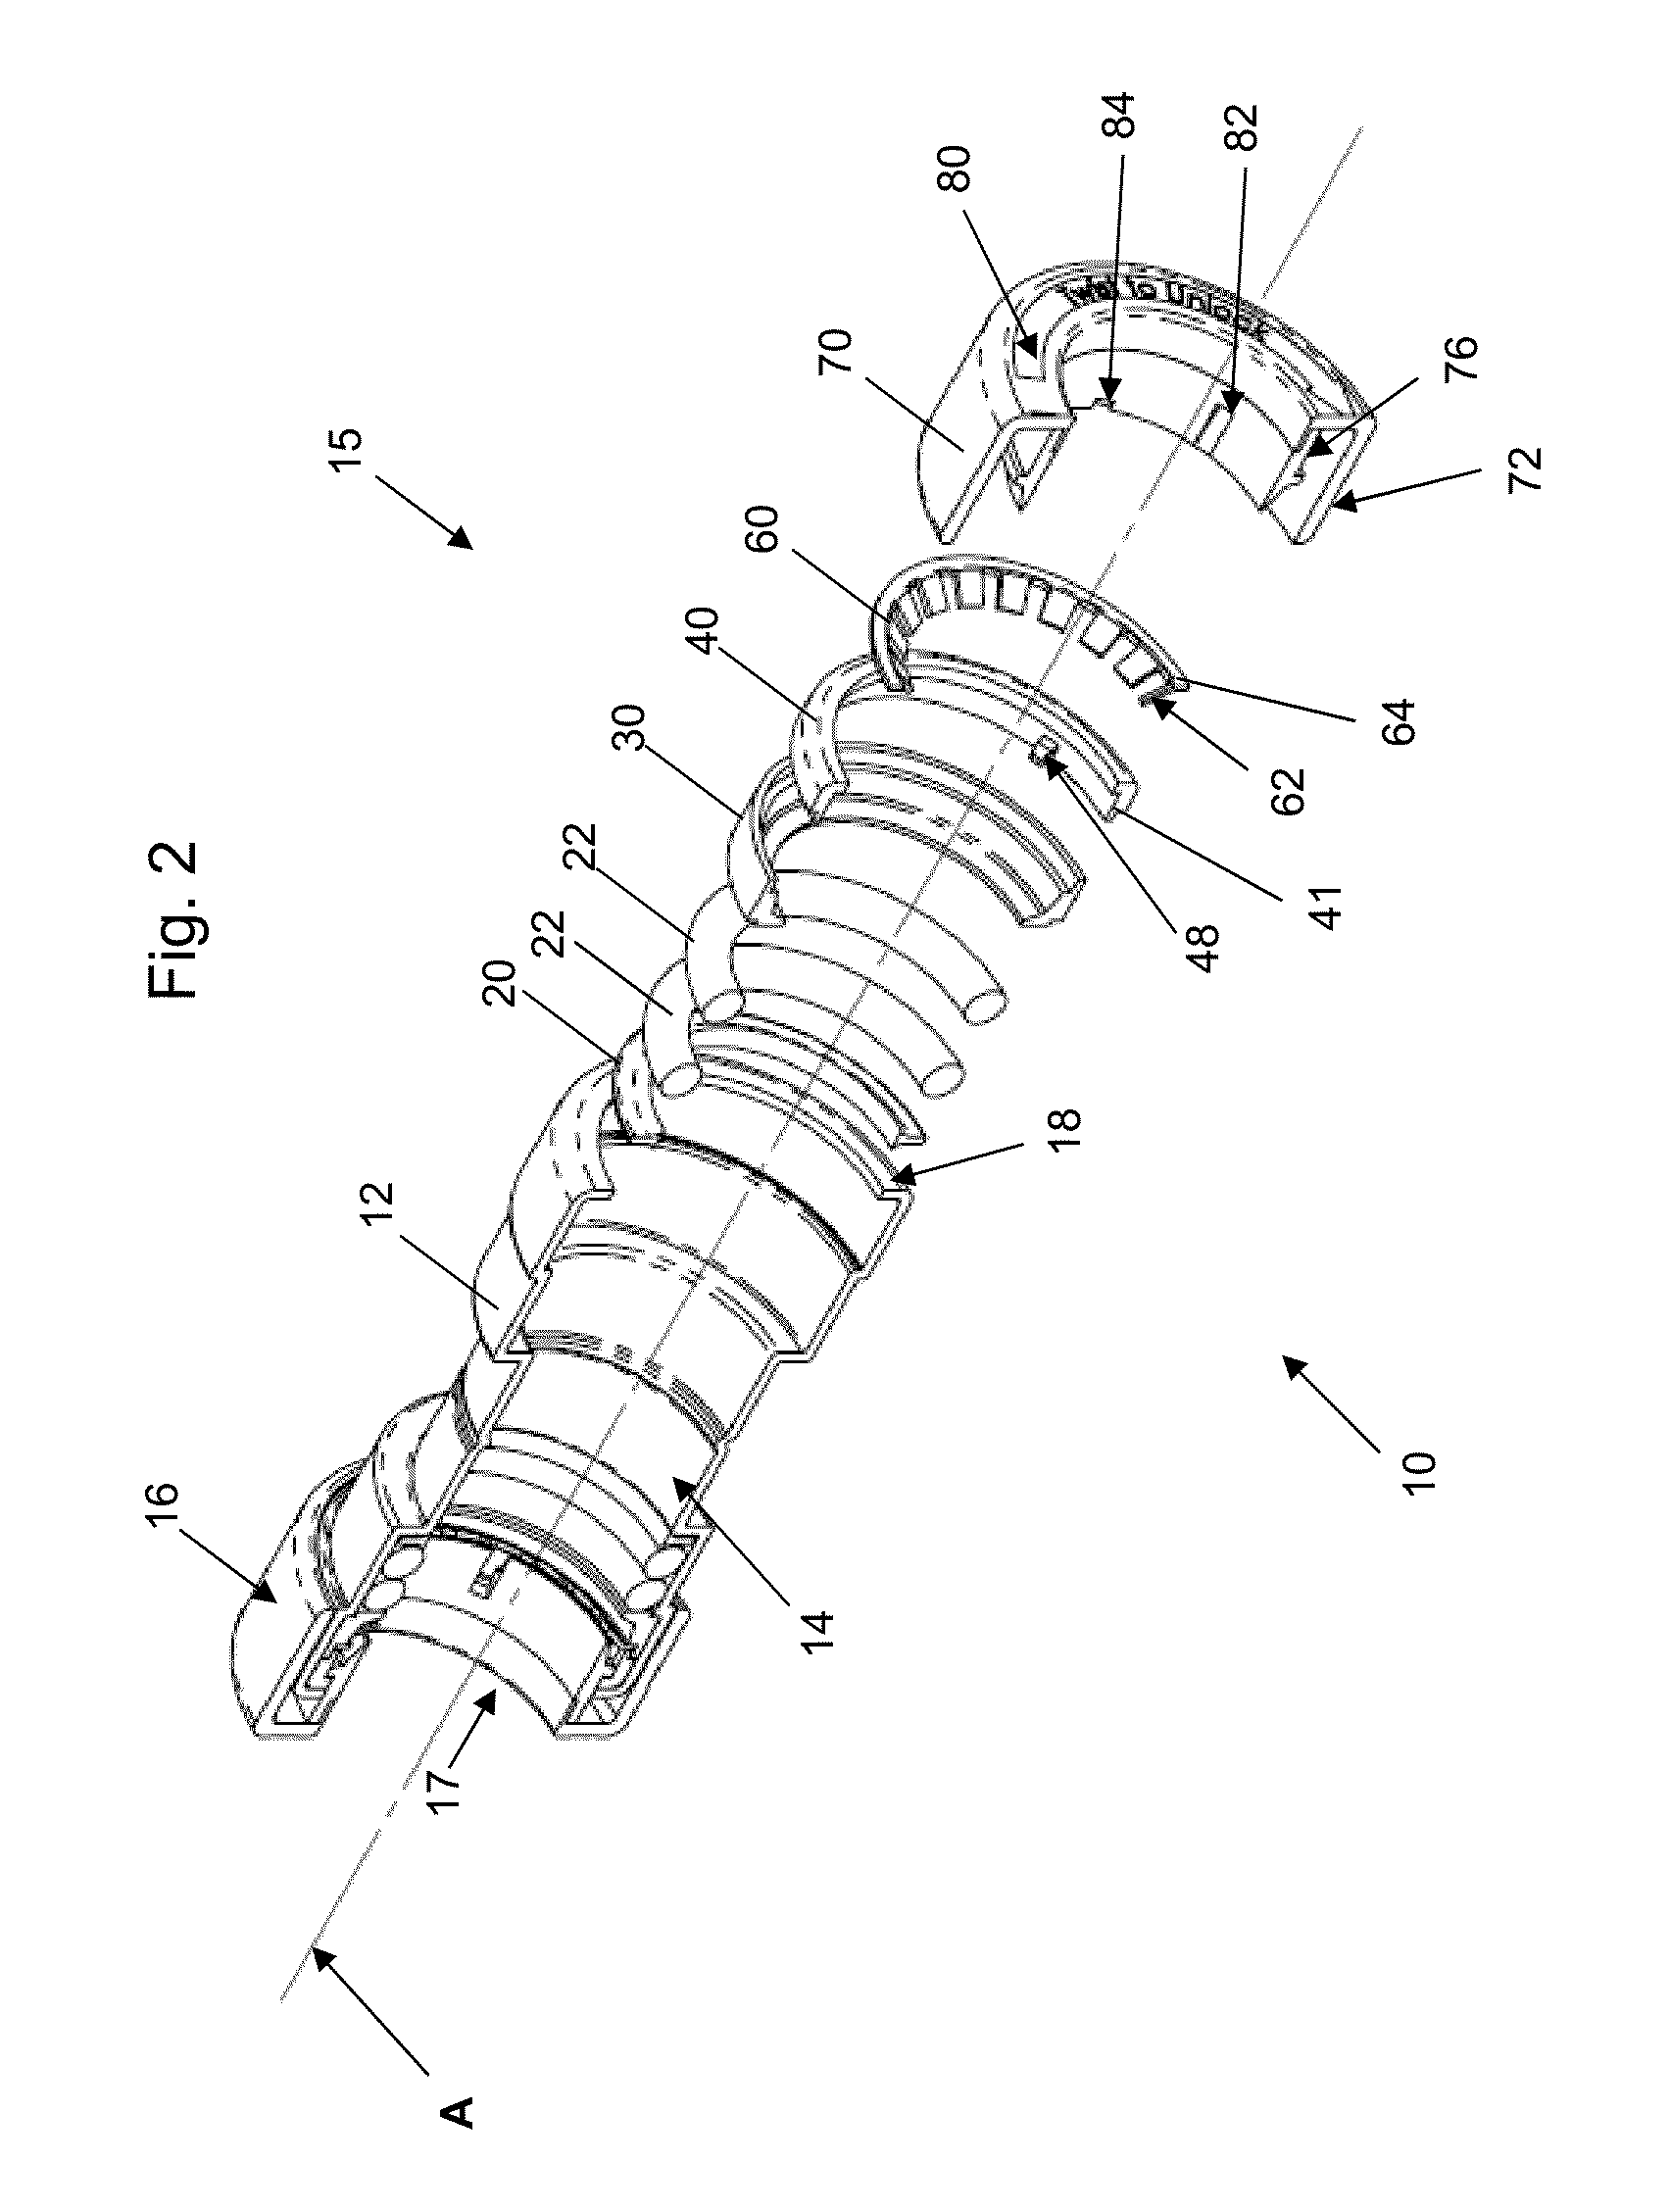 Push-to-connect fitting integrated packing arrangement, device and methods